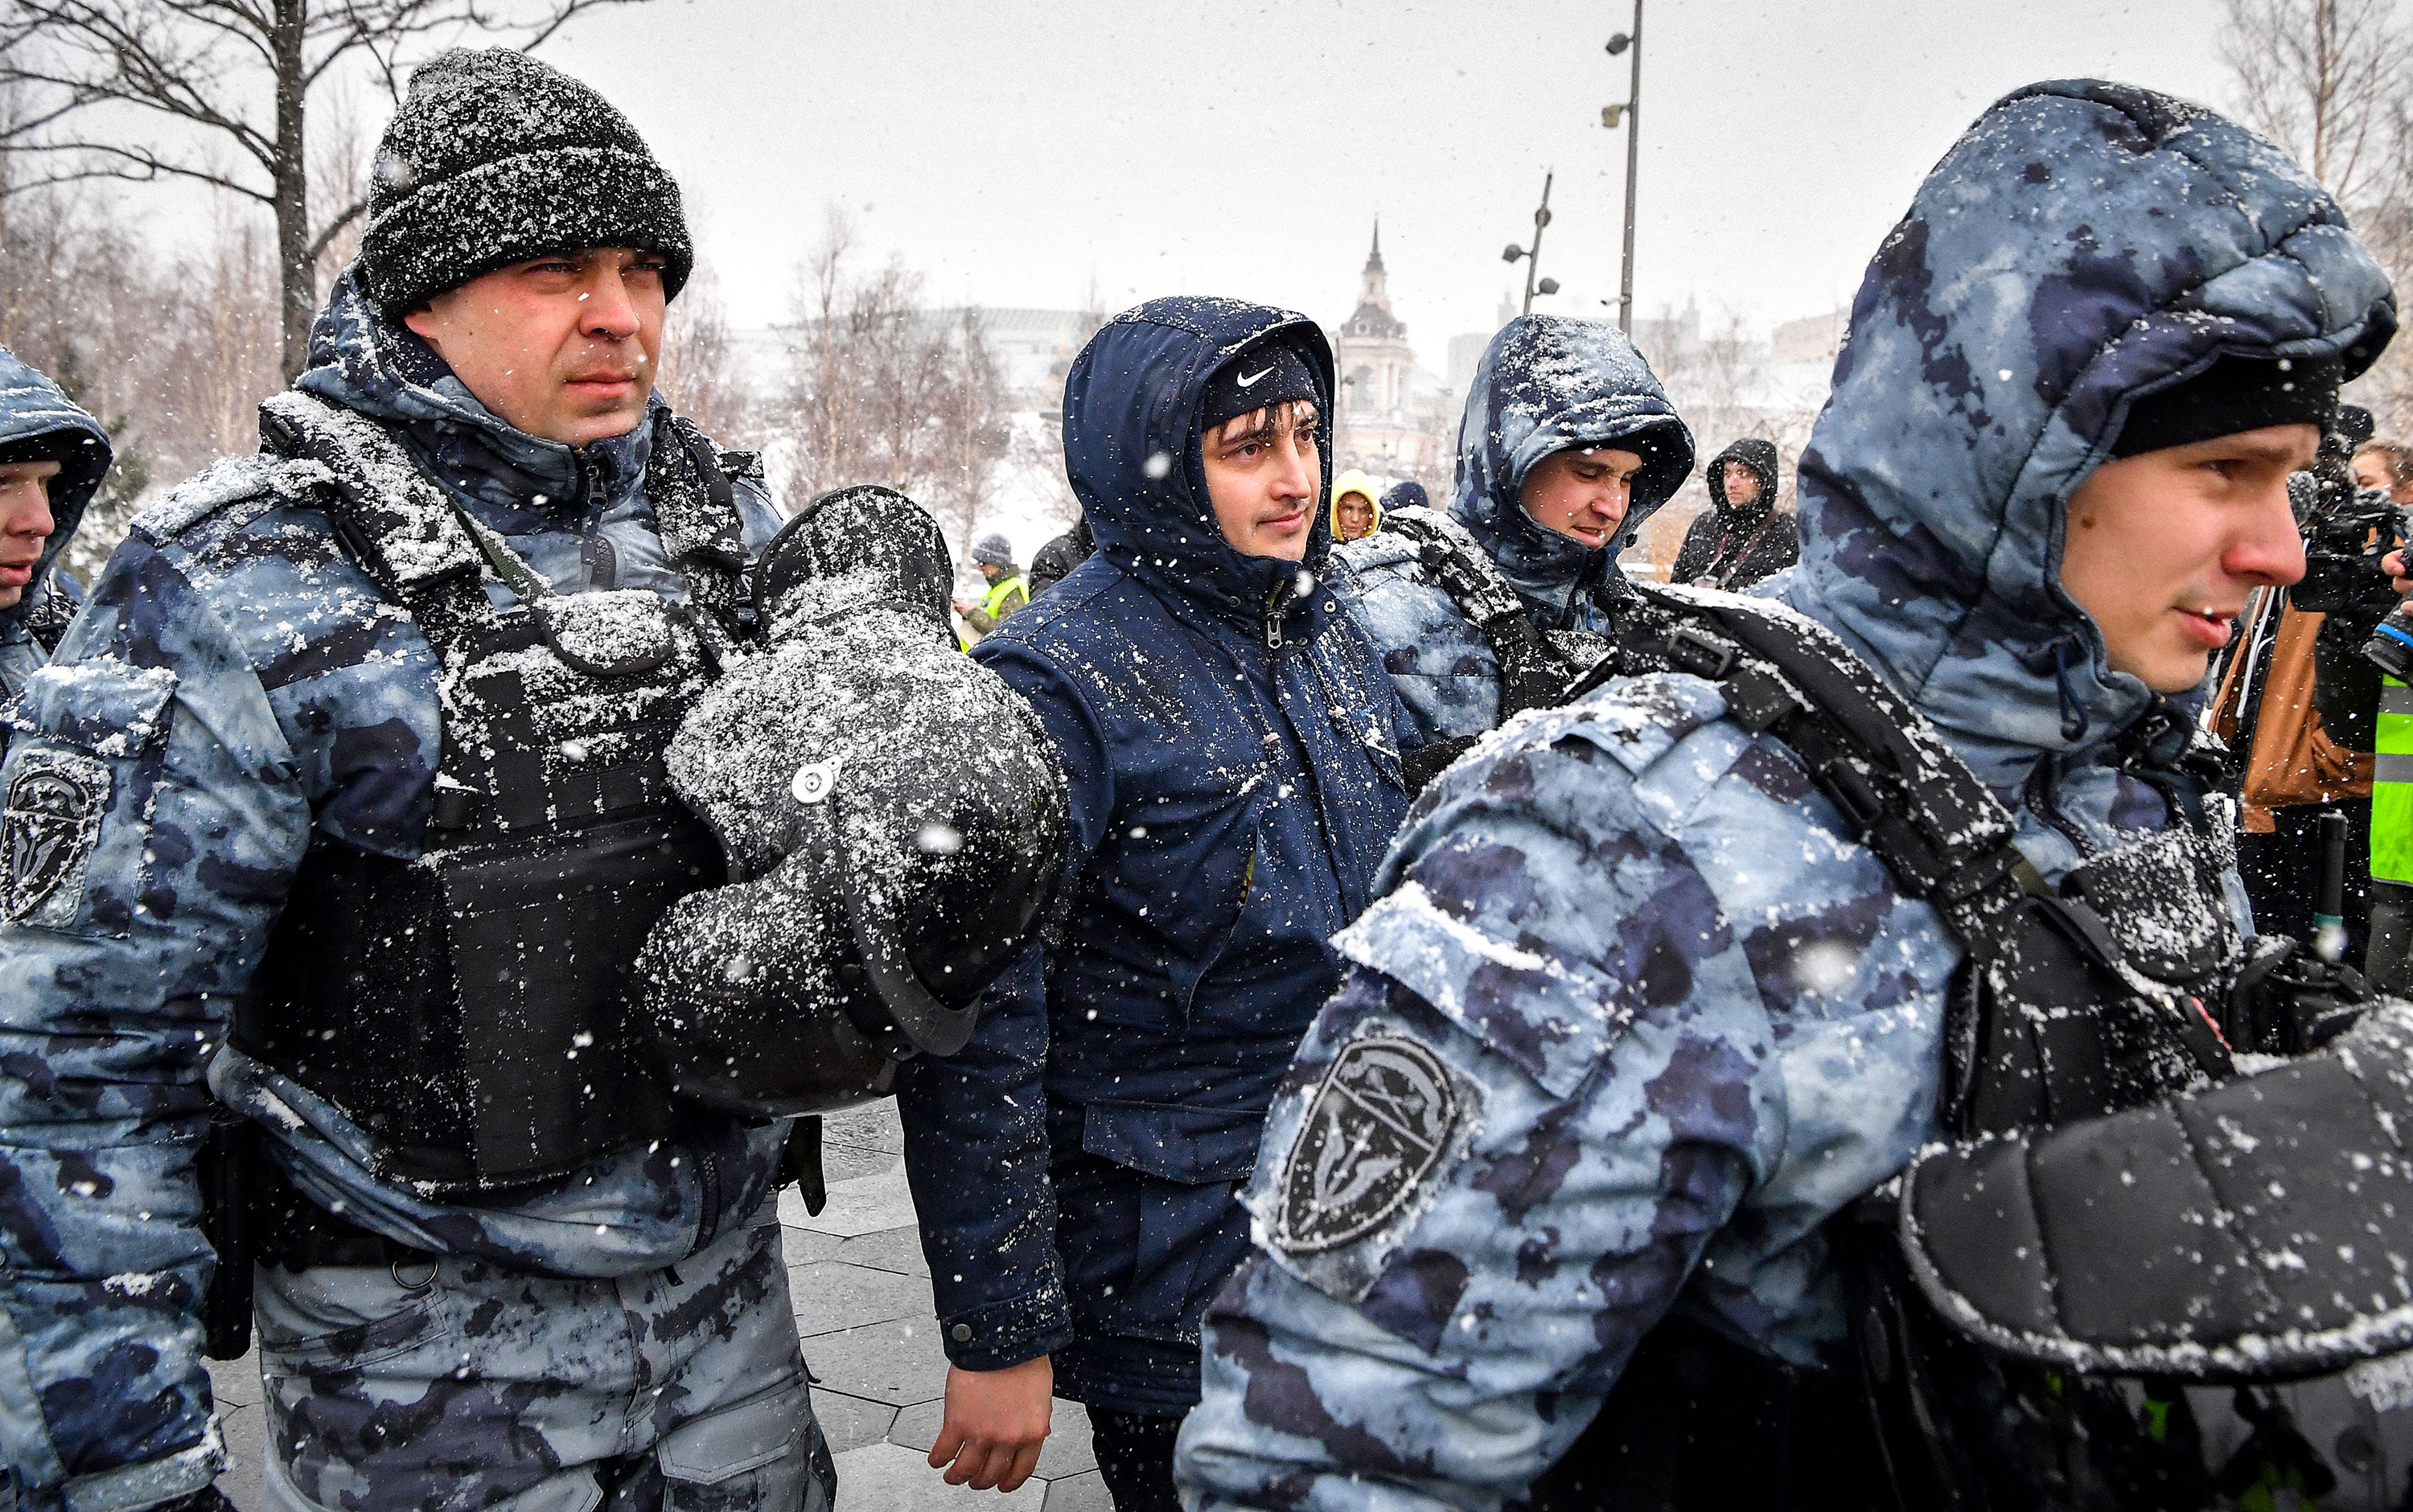 Police officers detain a man during a protest against Russian military action in Ukraine, in central Moscow on April 2.